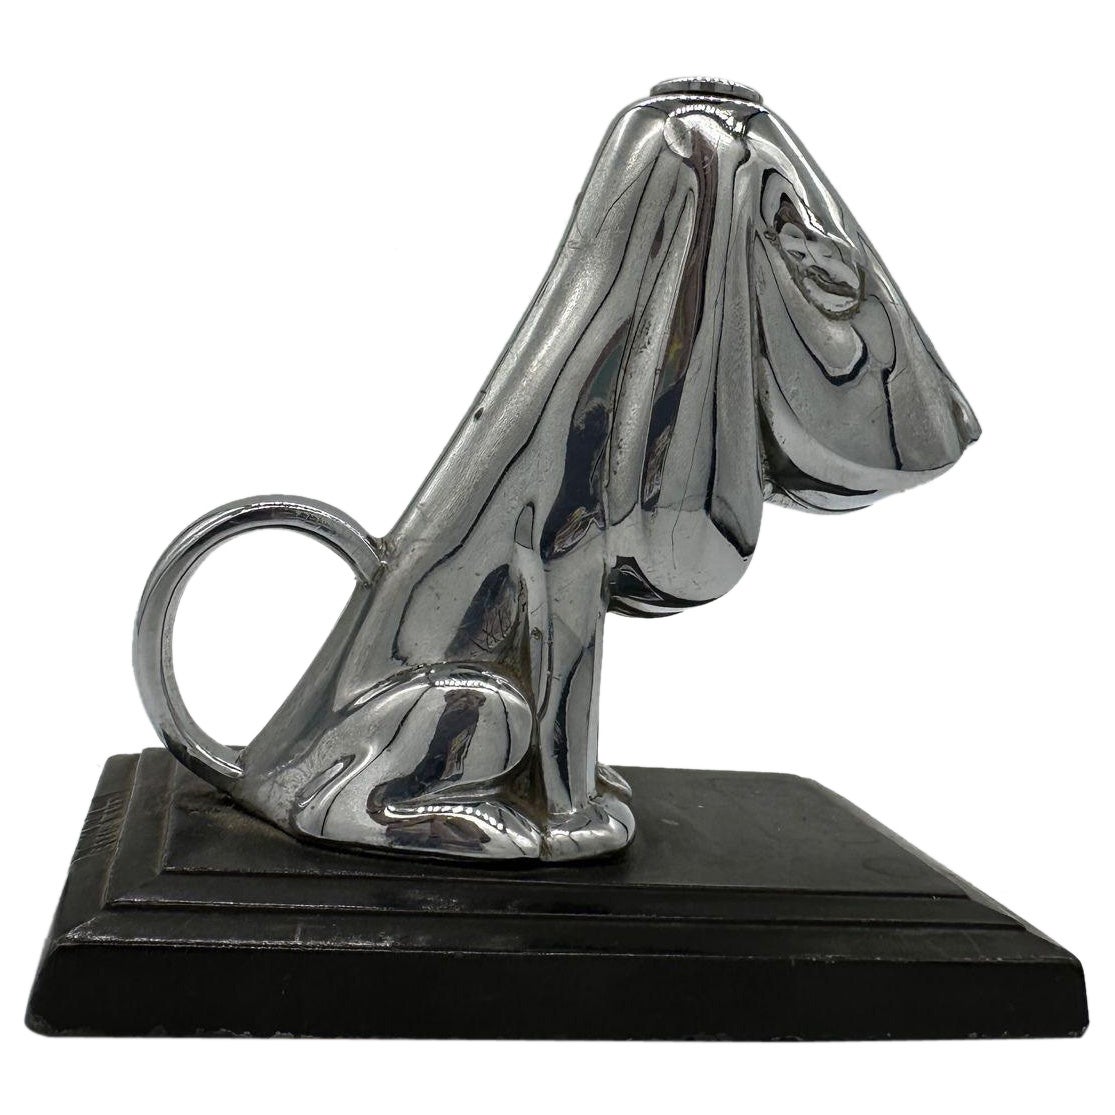 1935 Ronson Hound Dog Table Striker Lighter by Ronson For Sale